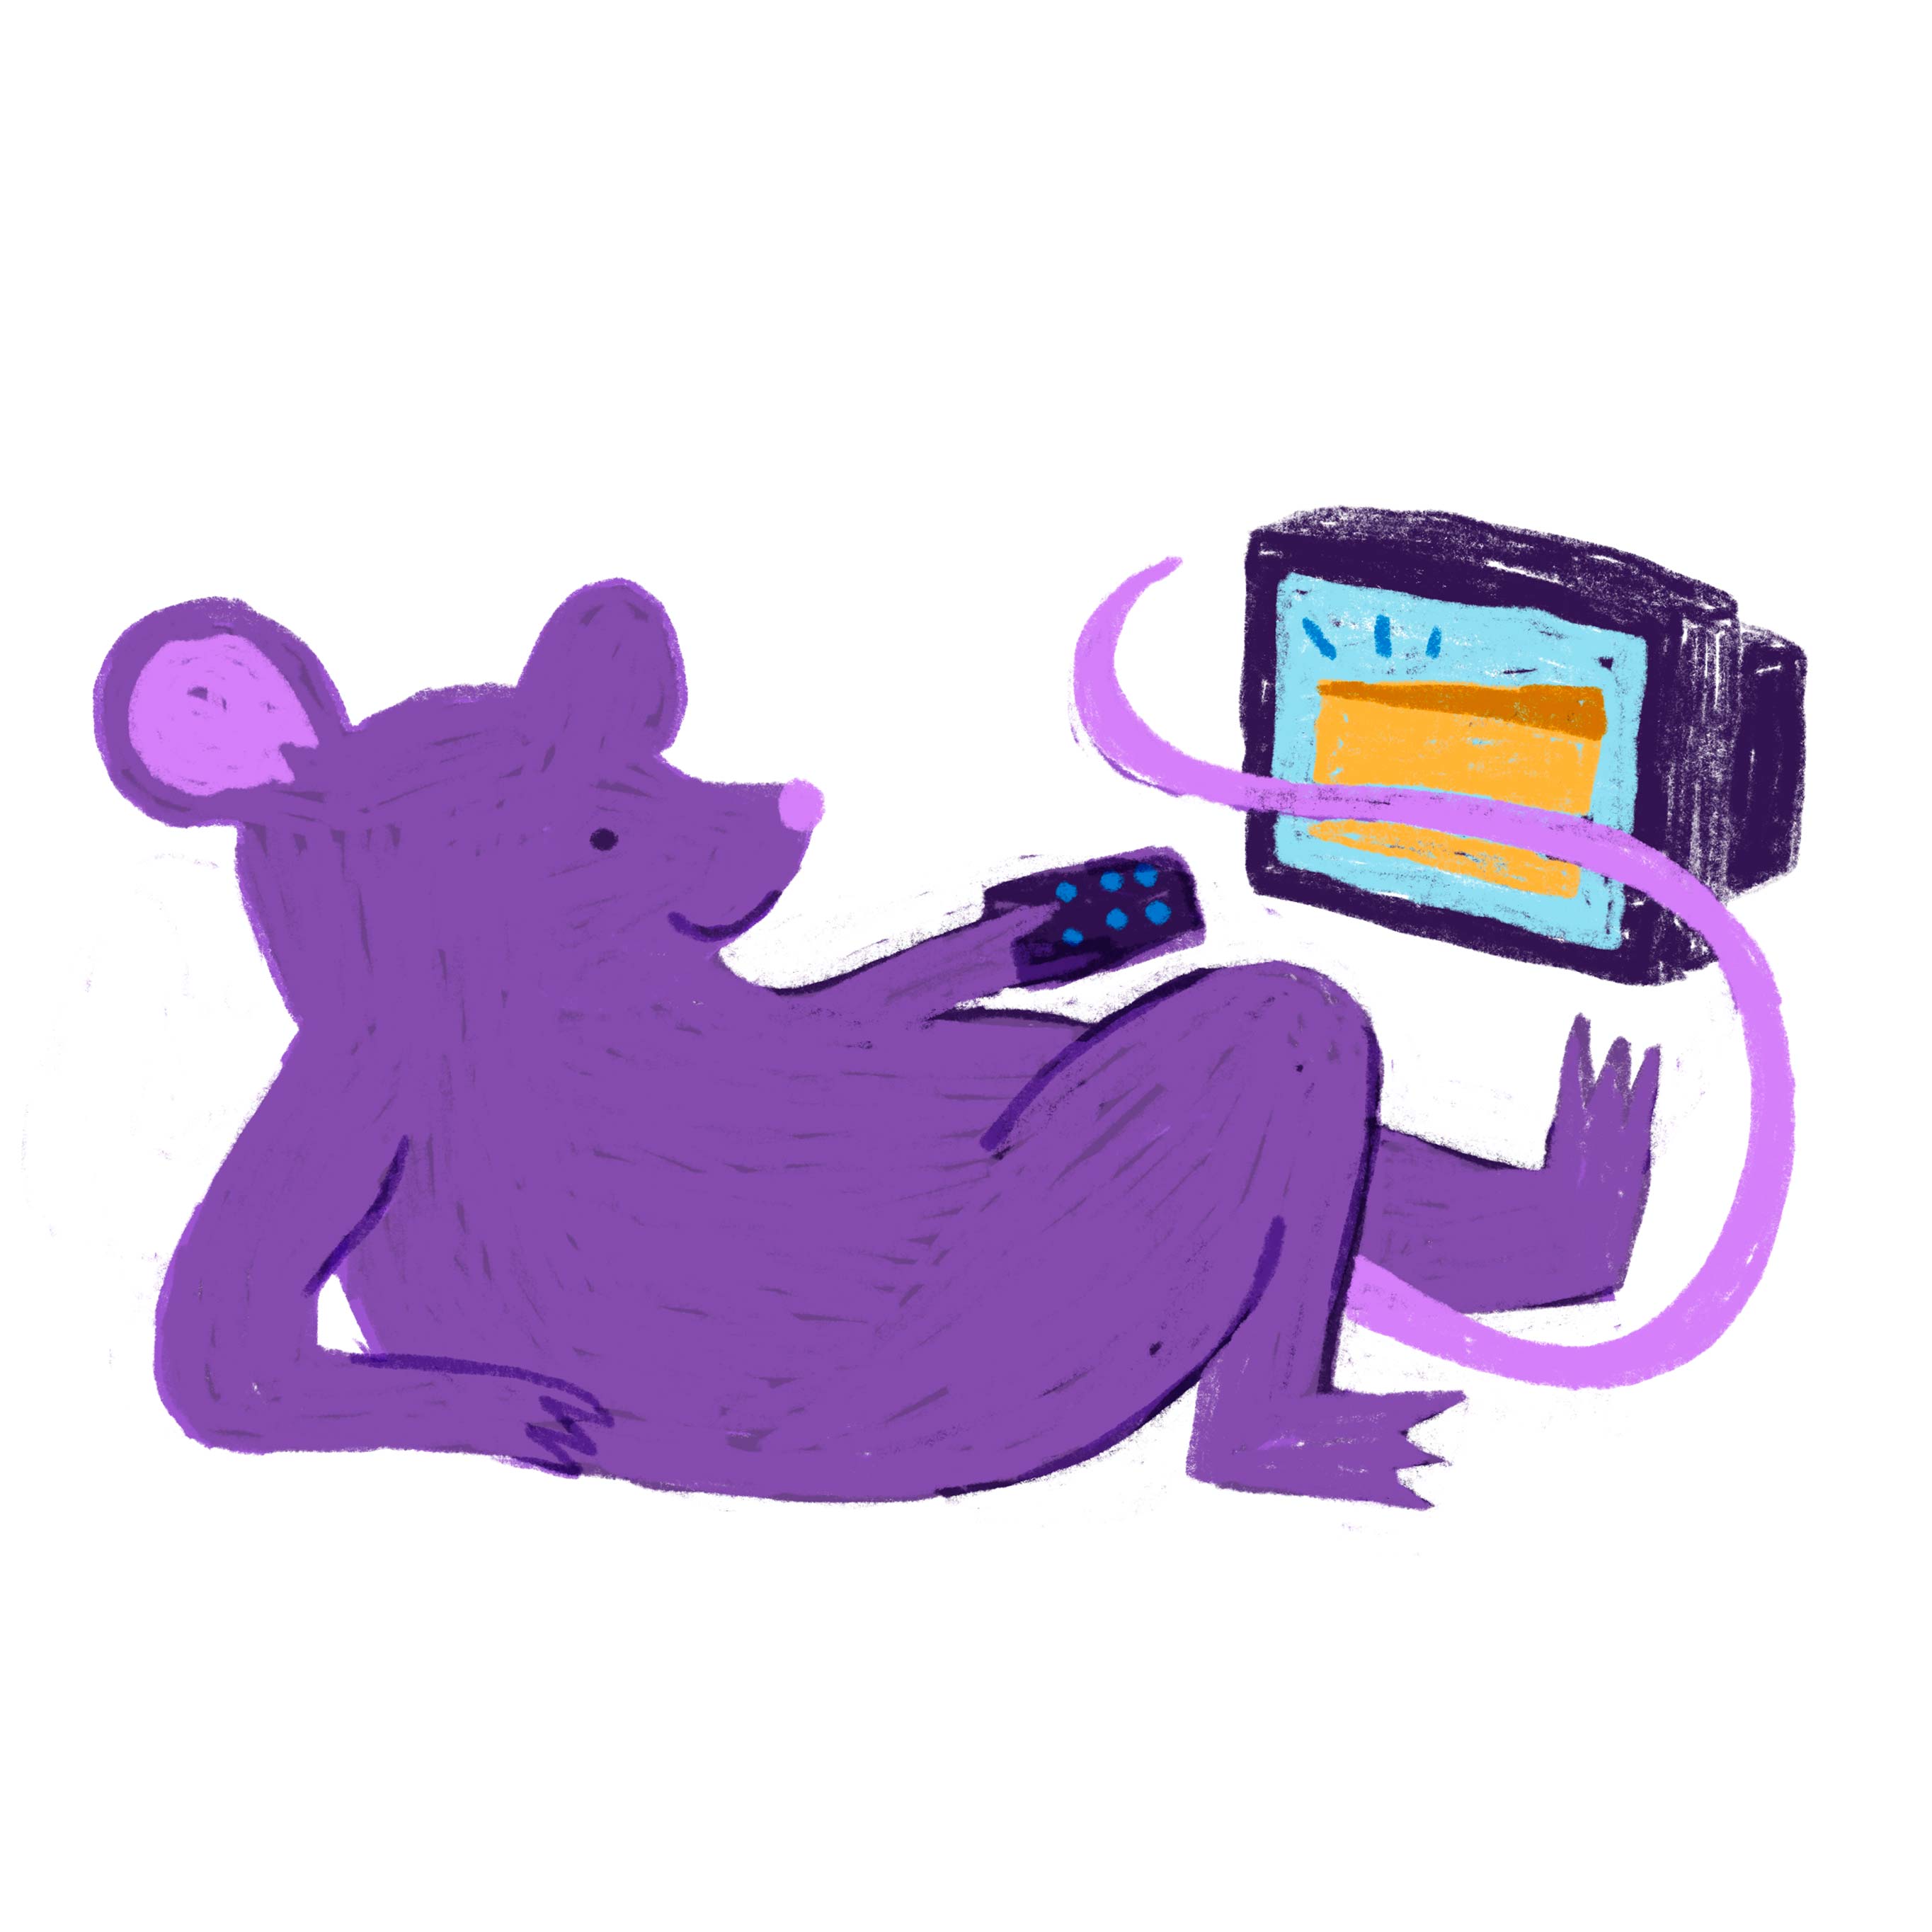 A purple rat lounges while watching TV.